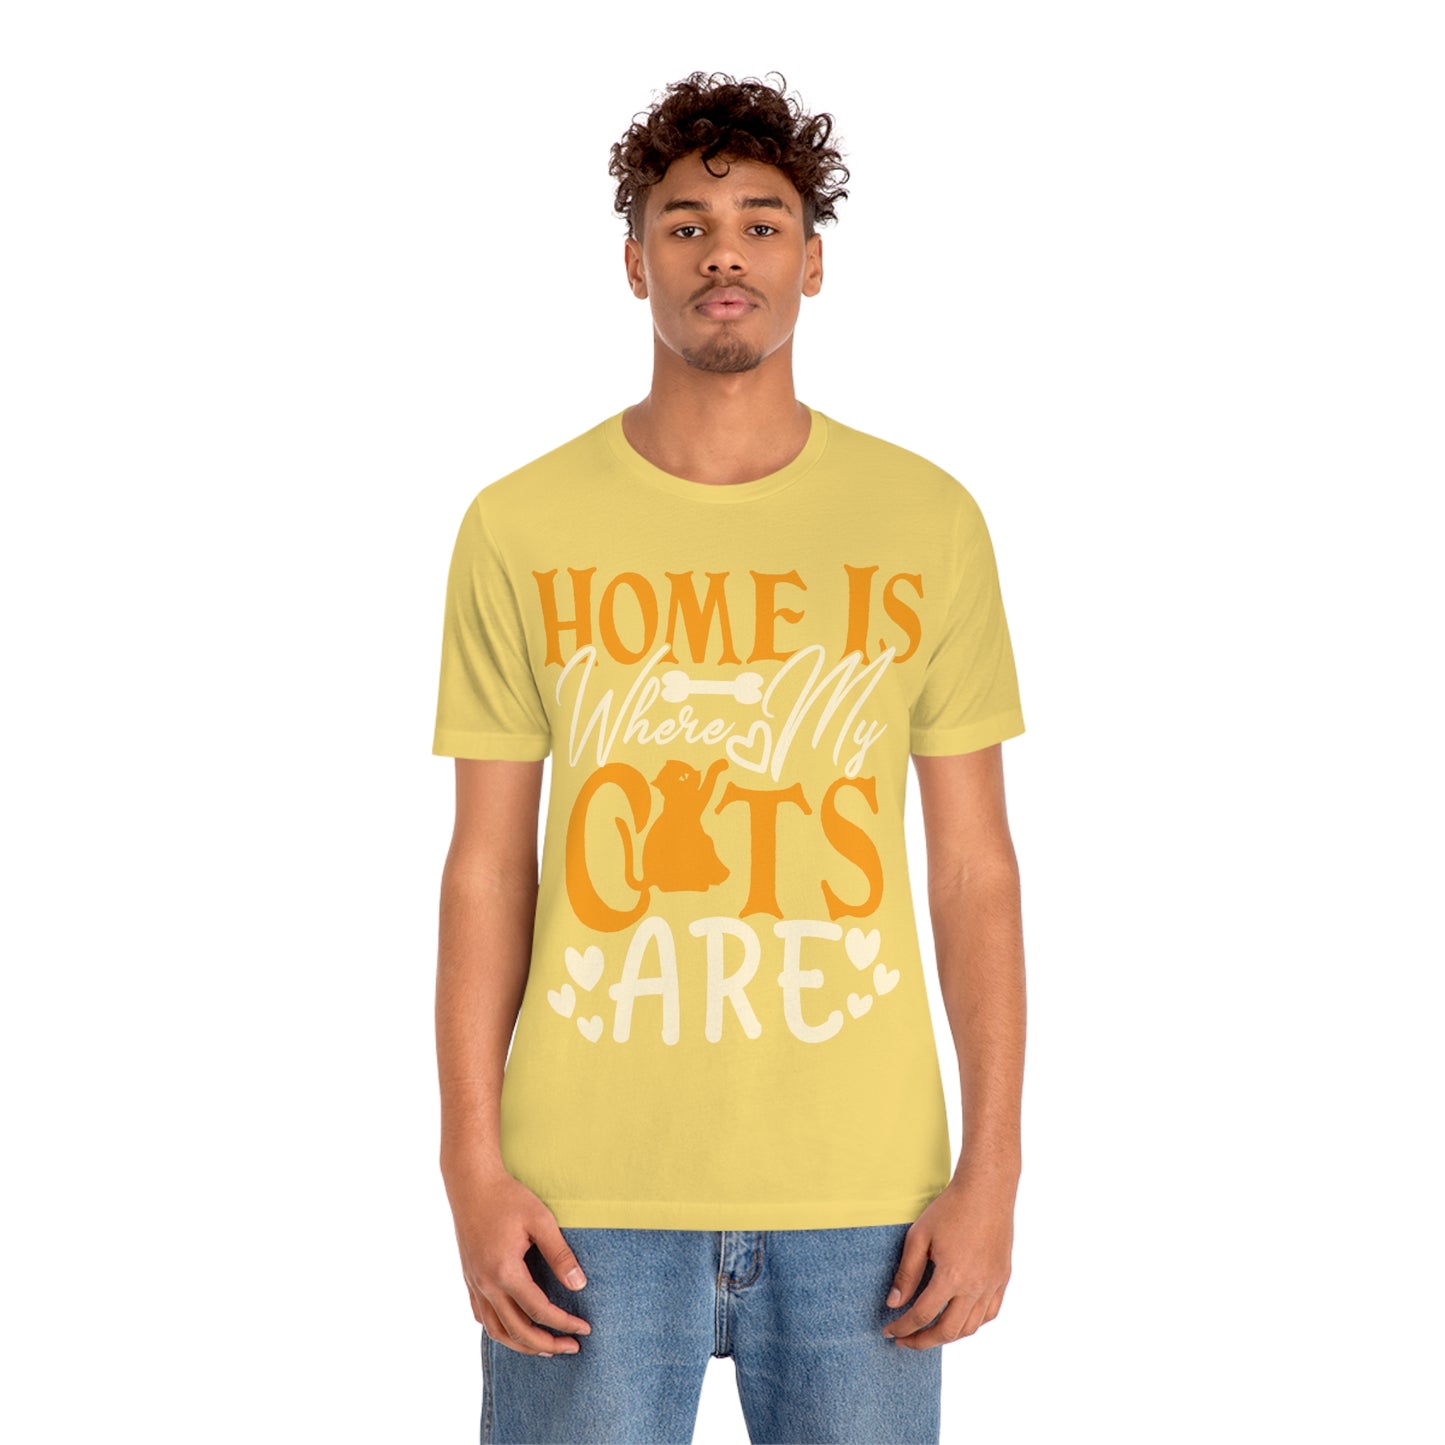 Home Is Where My Cats Are - Unisex T-Shirt